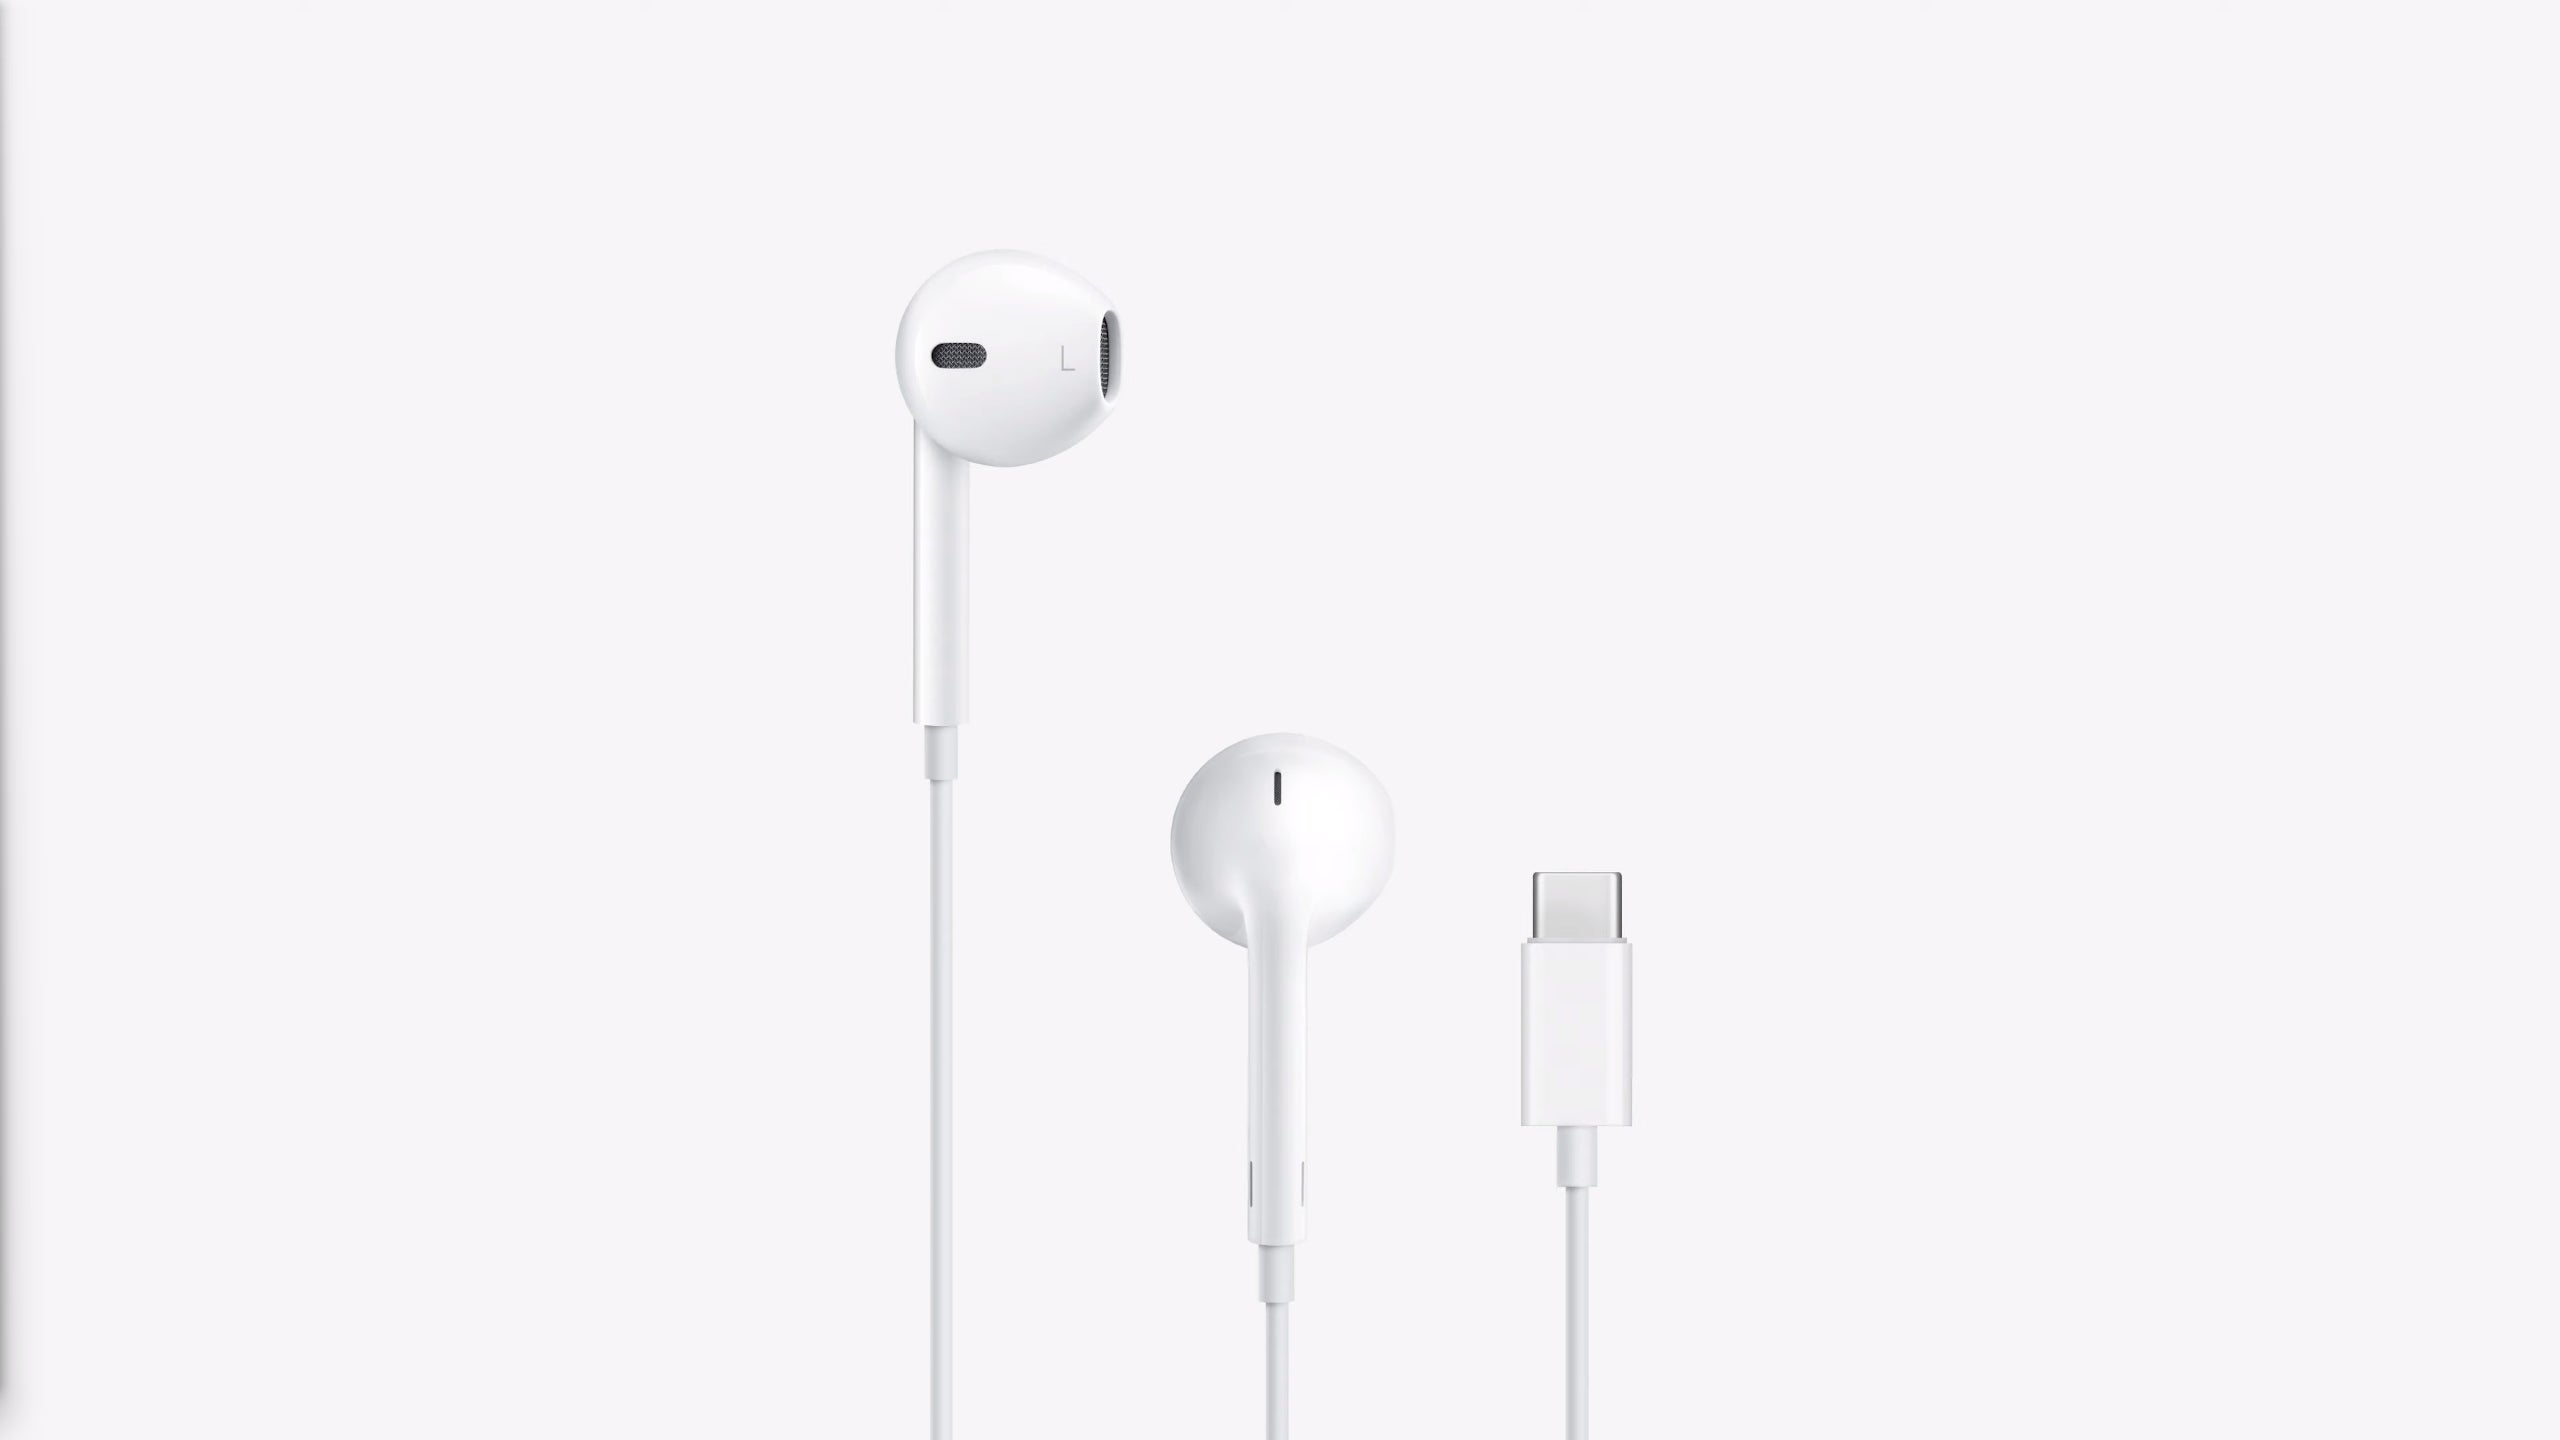 The AirPods Pro 2 and the EarPods also switch to the USB-C standard